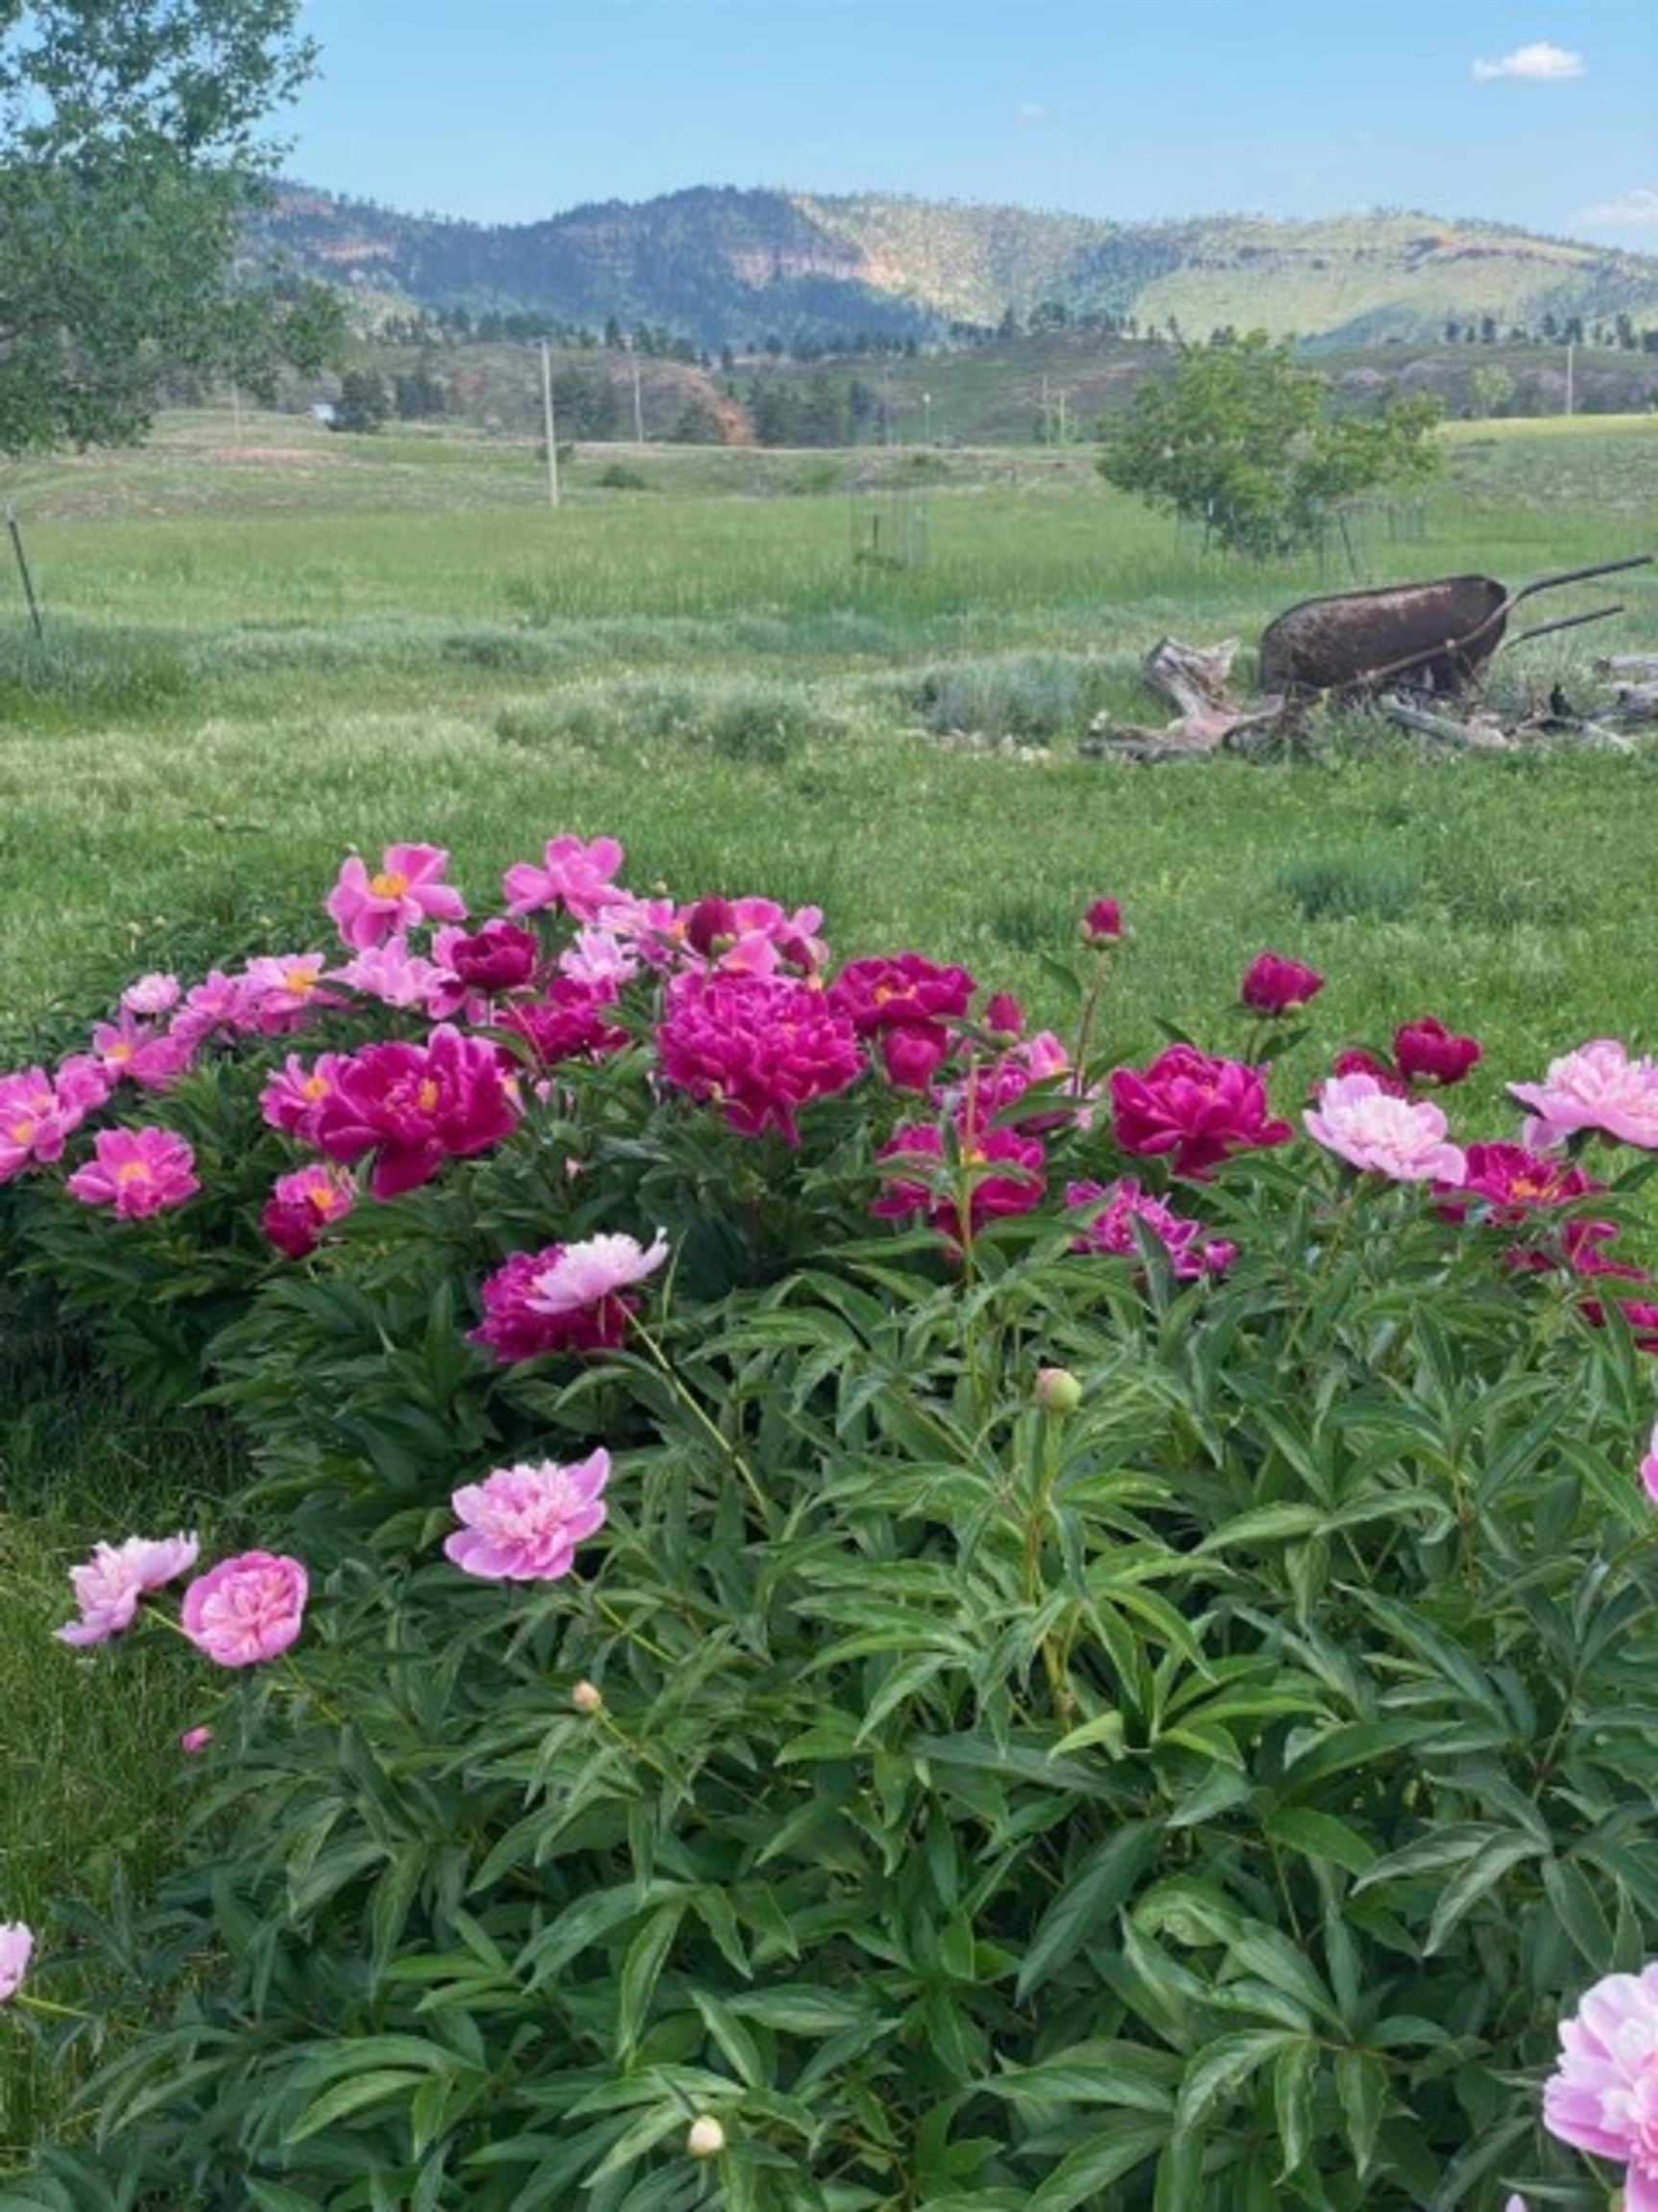 Perennial Peony Bushes Come to Life Each Year!